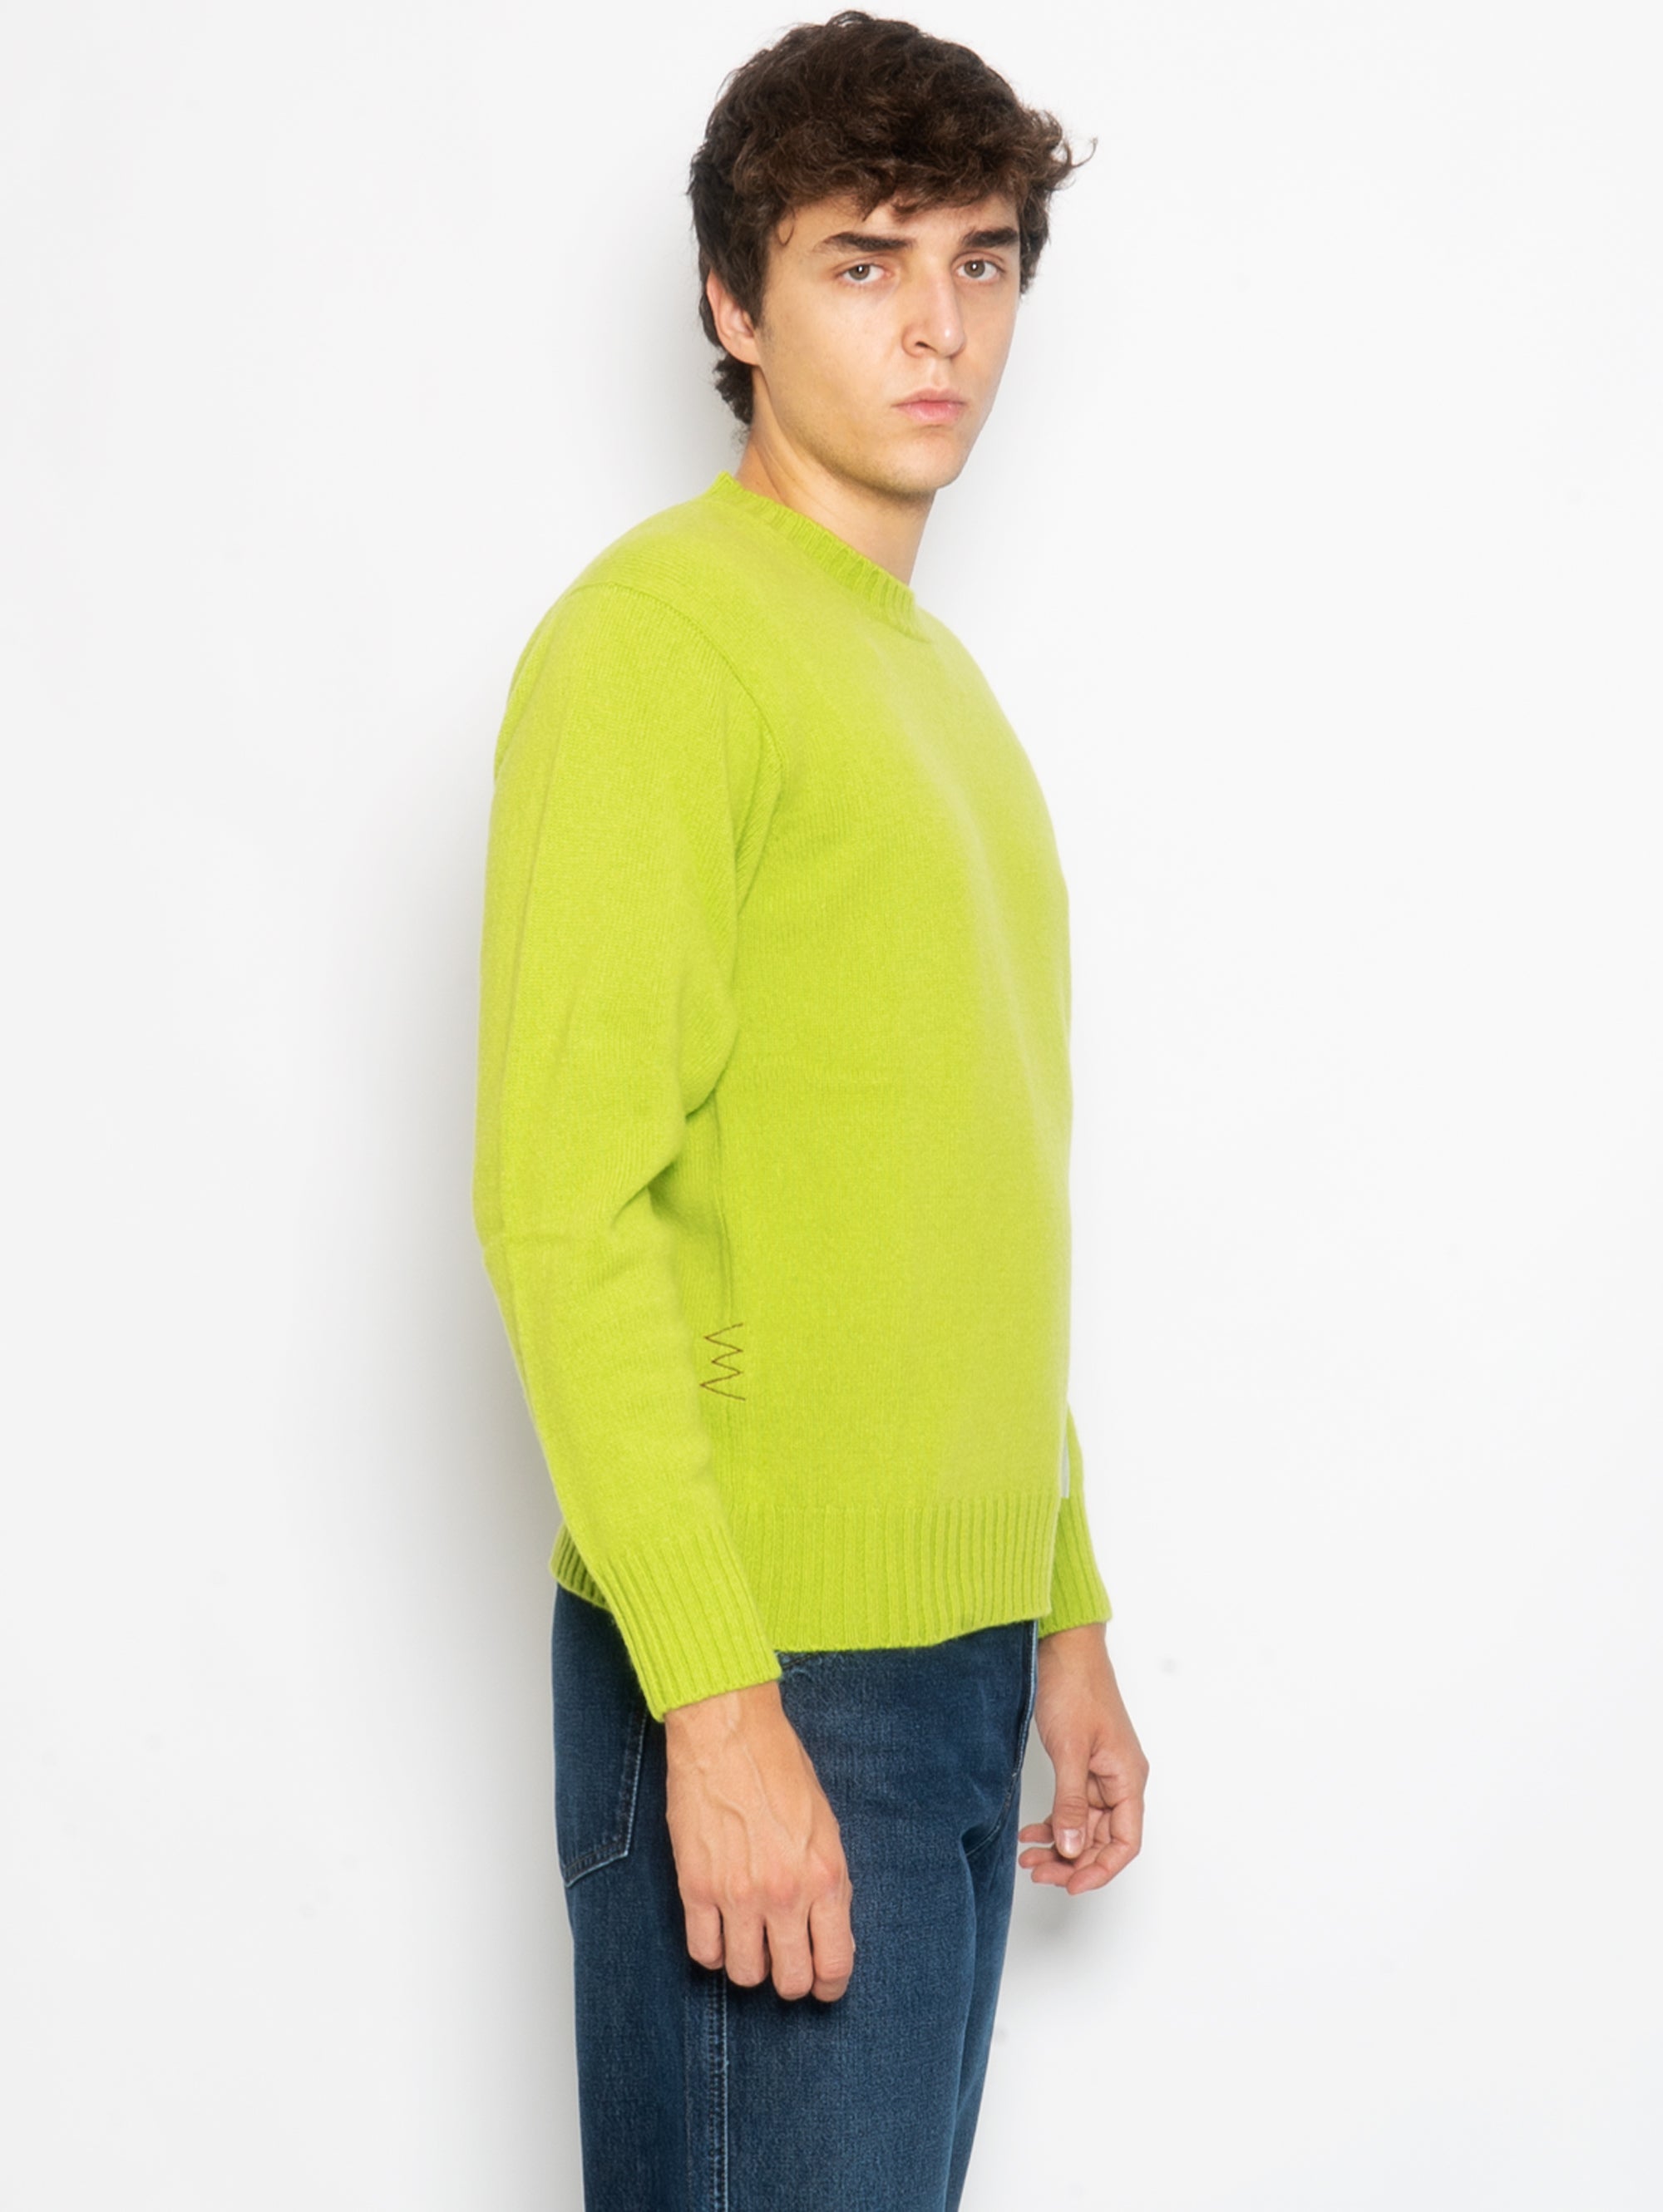 Green Wool and Cashmere Crewneck Sweater